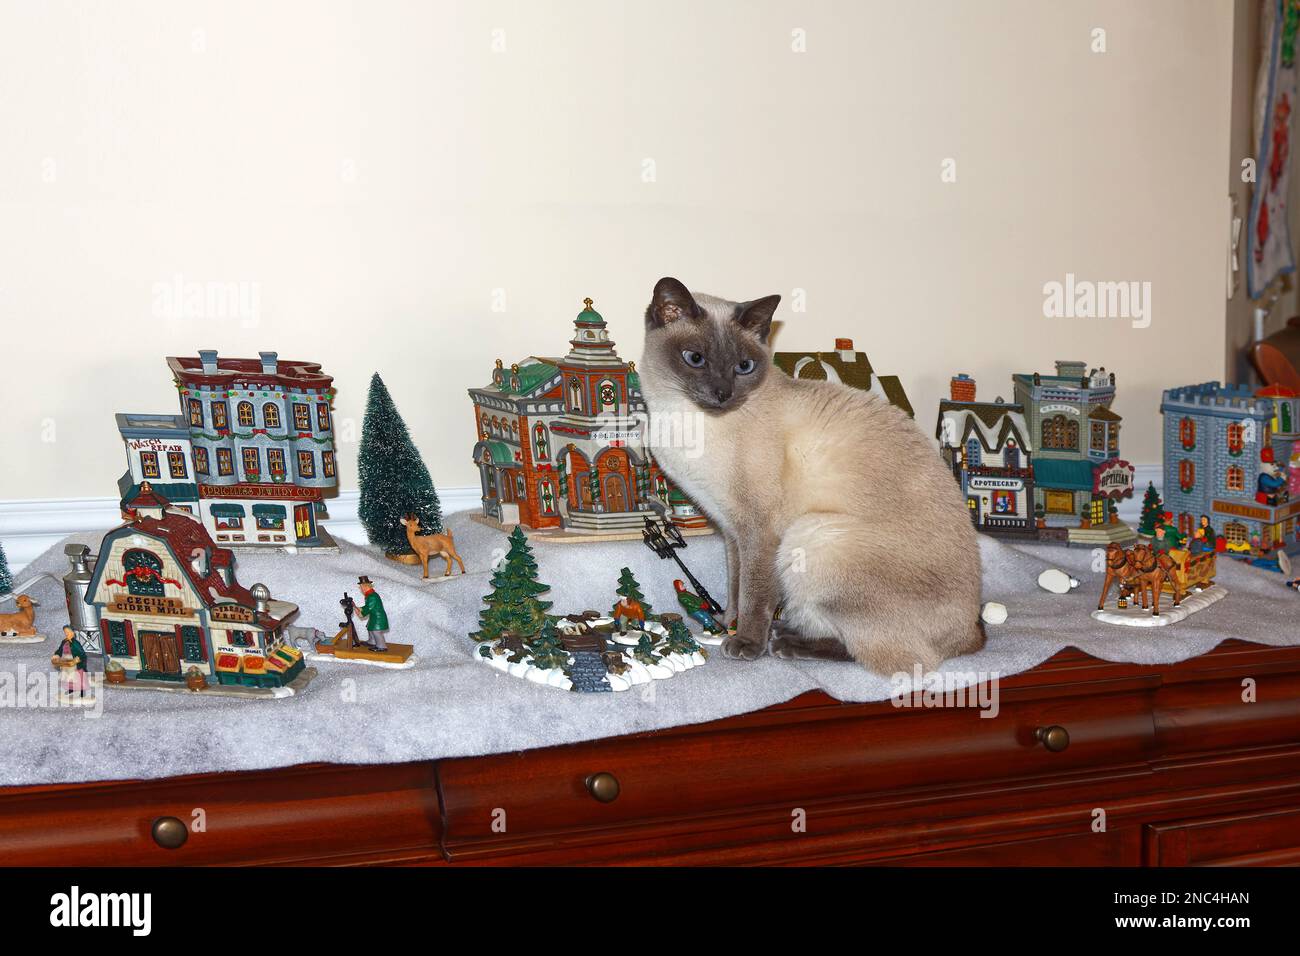 cat sitting among ceramic village, Tonkinese, pure bred, feline, pet, Christmas decoration, some pieces knocked over, humorous, PR Stock Photo